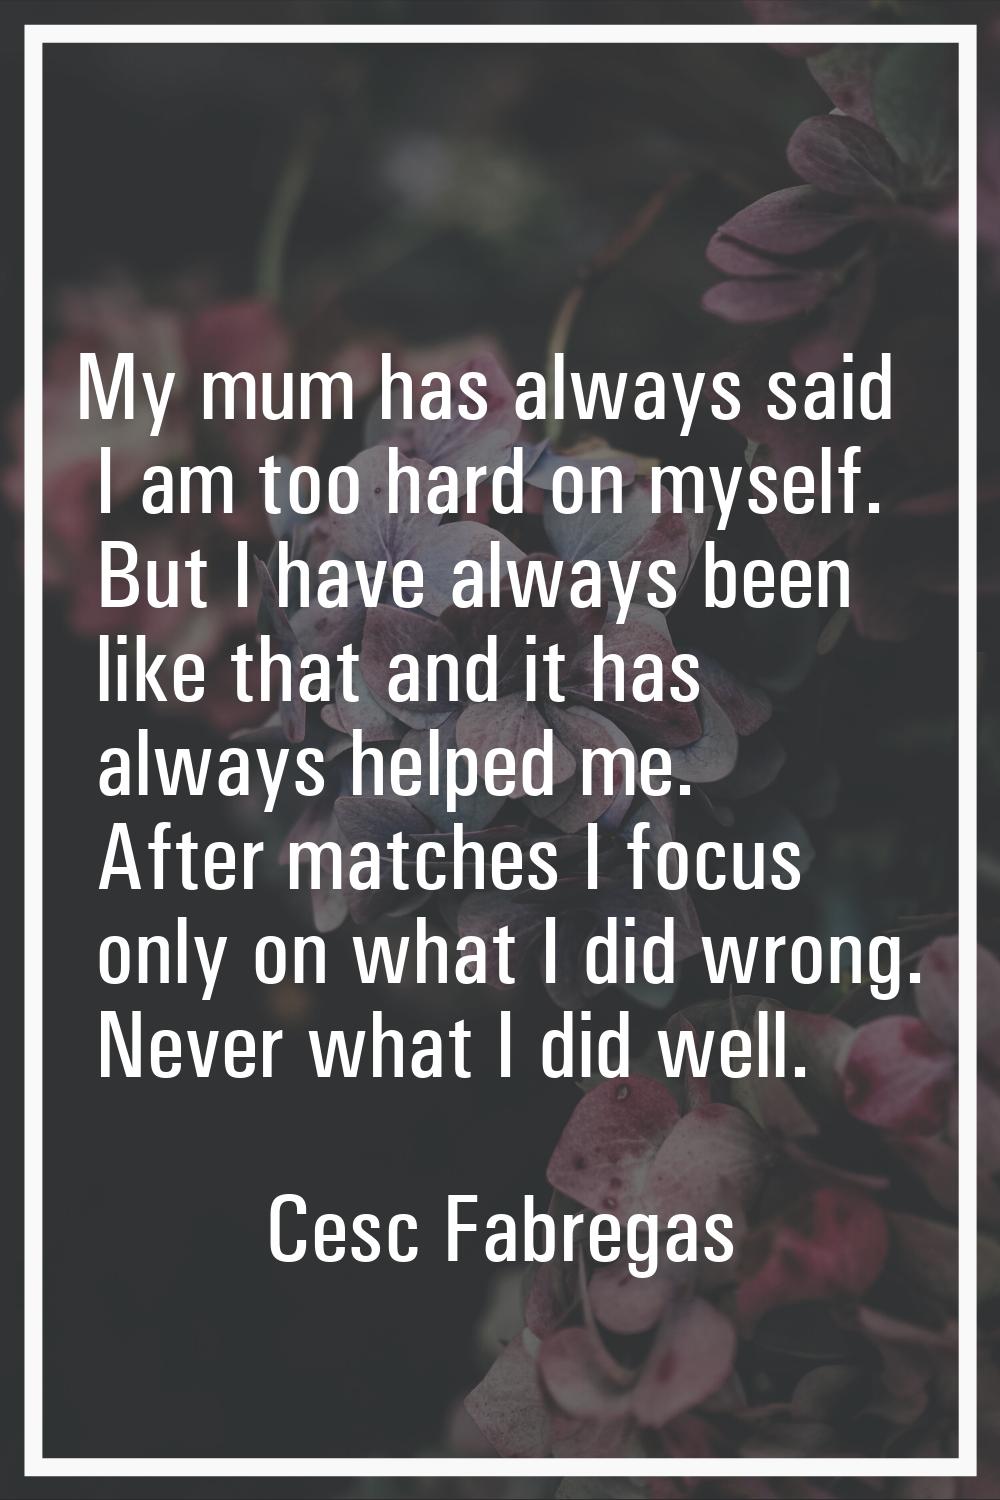 My mum has always said I am too hard on myself. But I have always been like that and it has always 